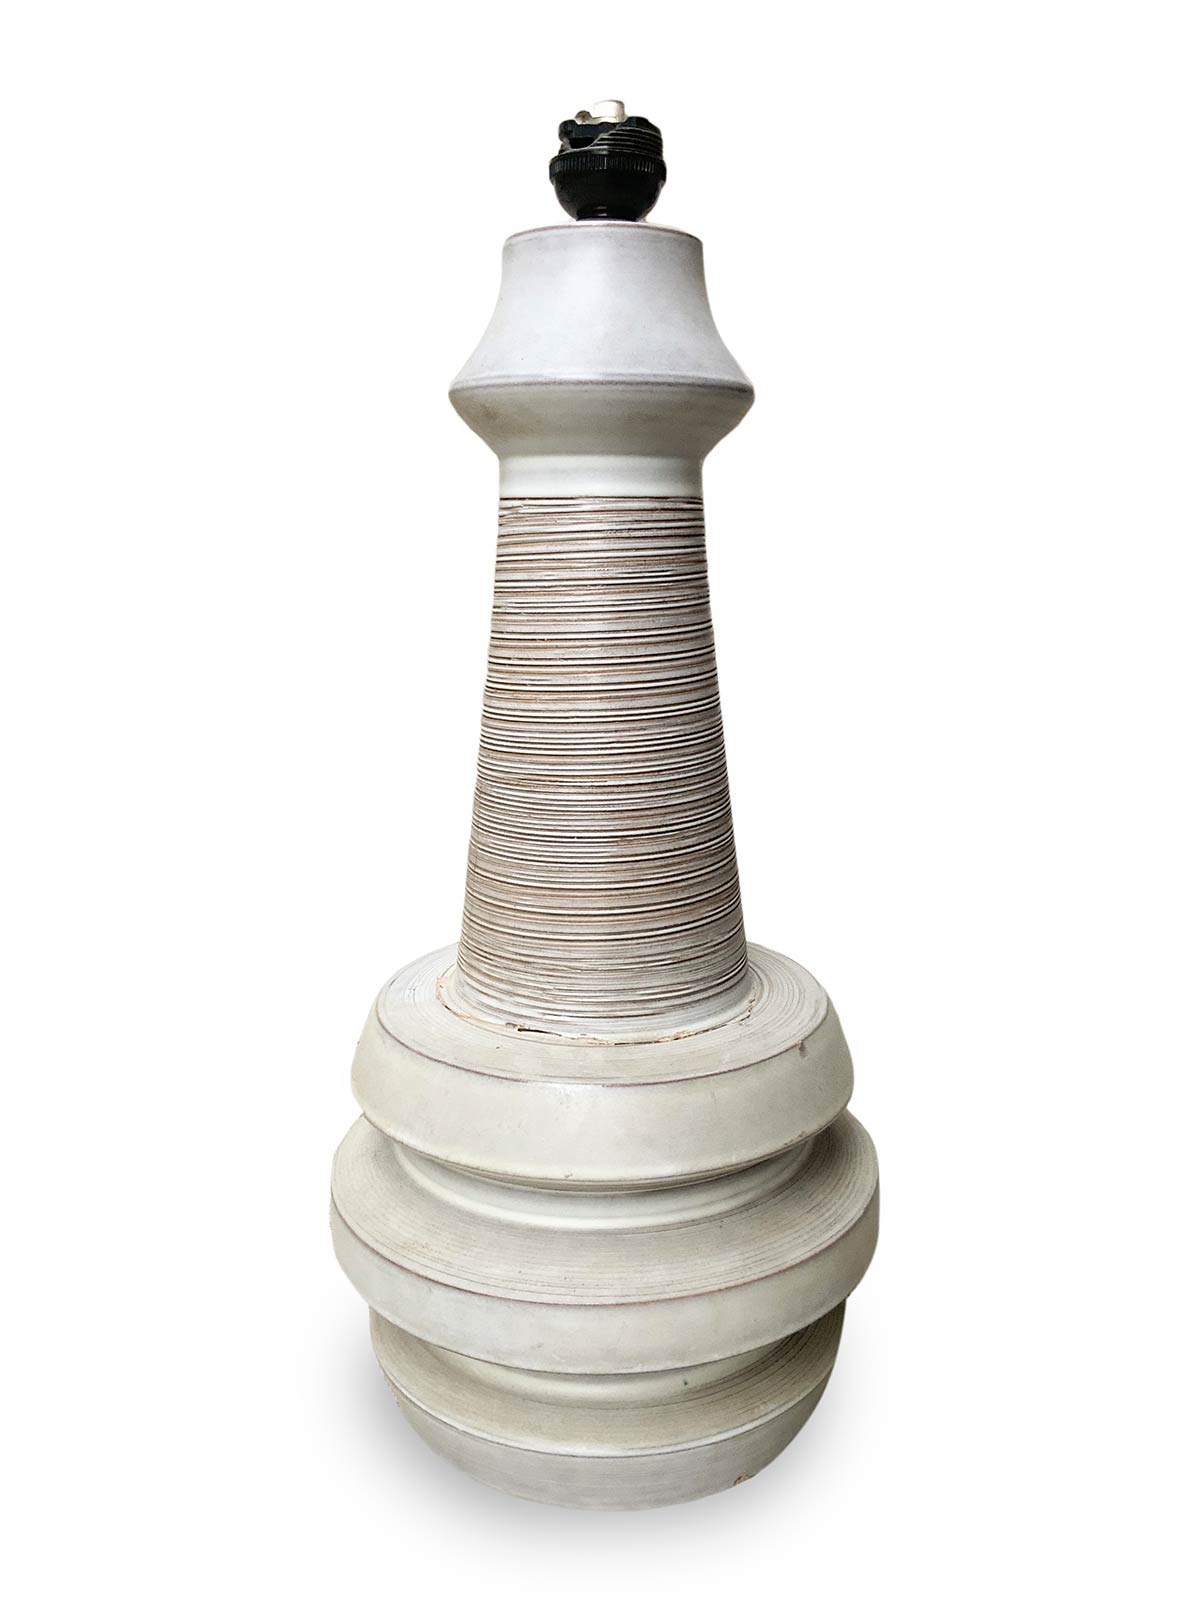 Italian Production, A. Tasca style. Ceramic lamp table in shades of gray with thin polychrome